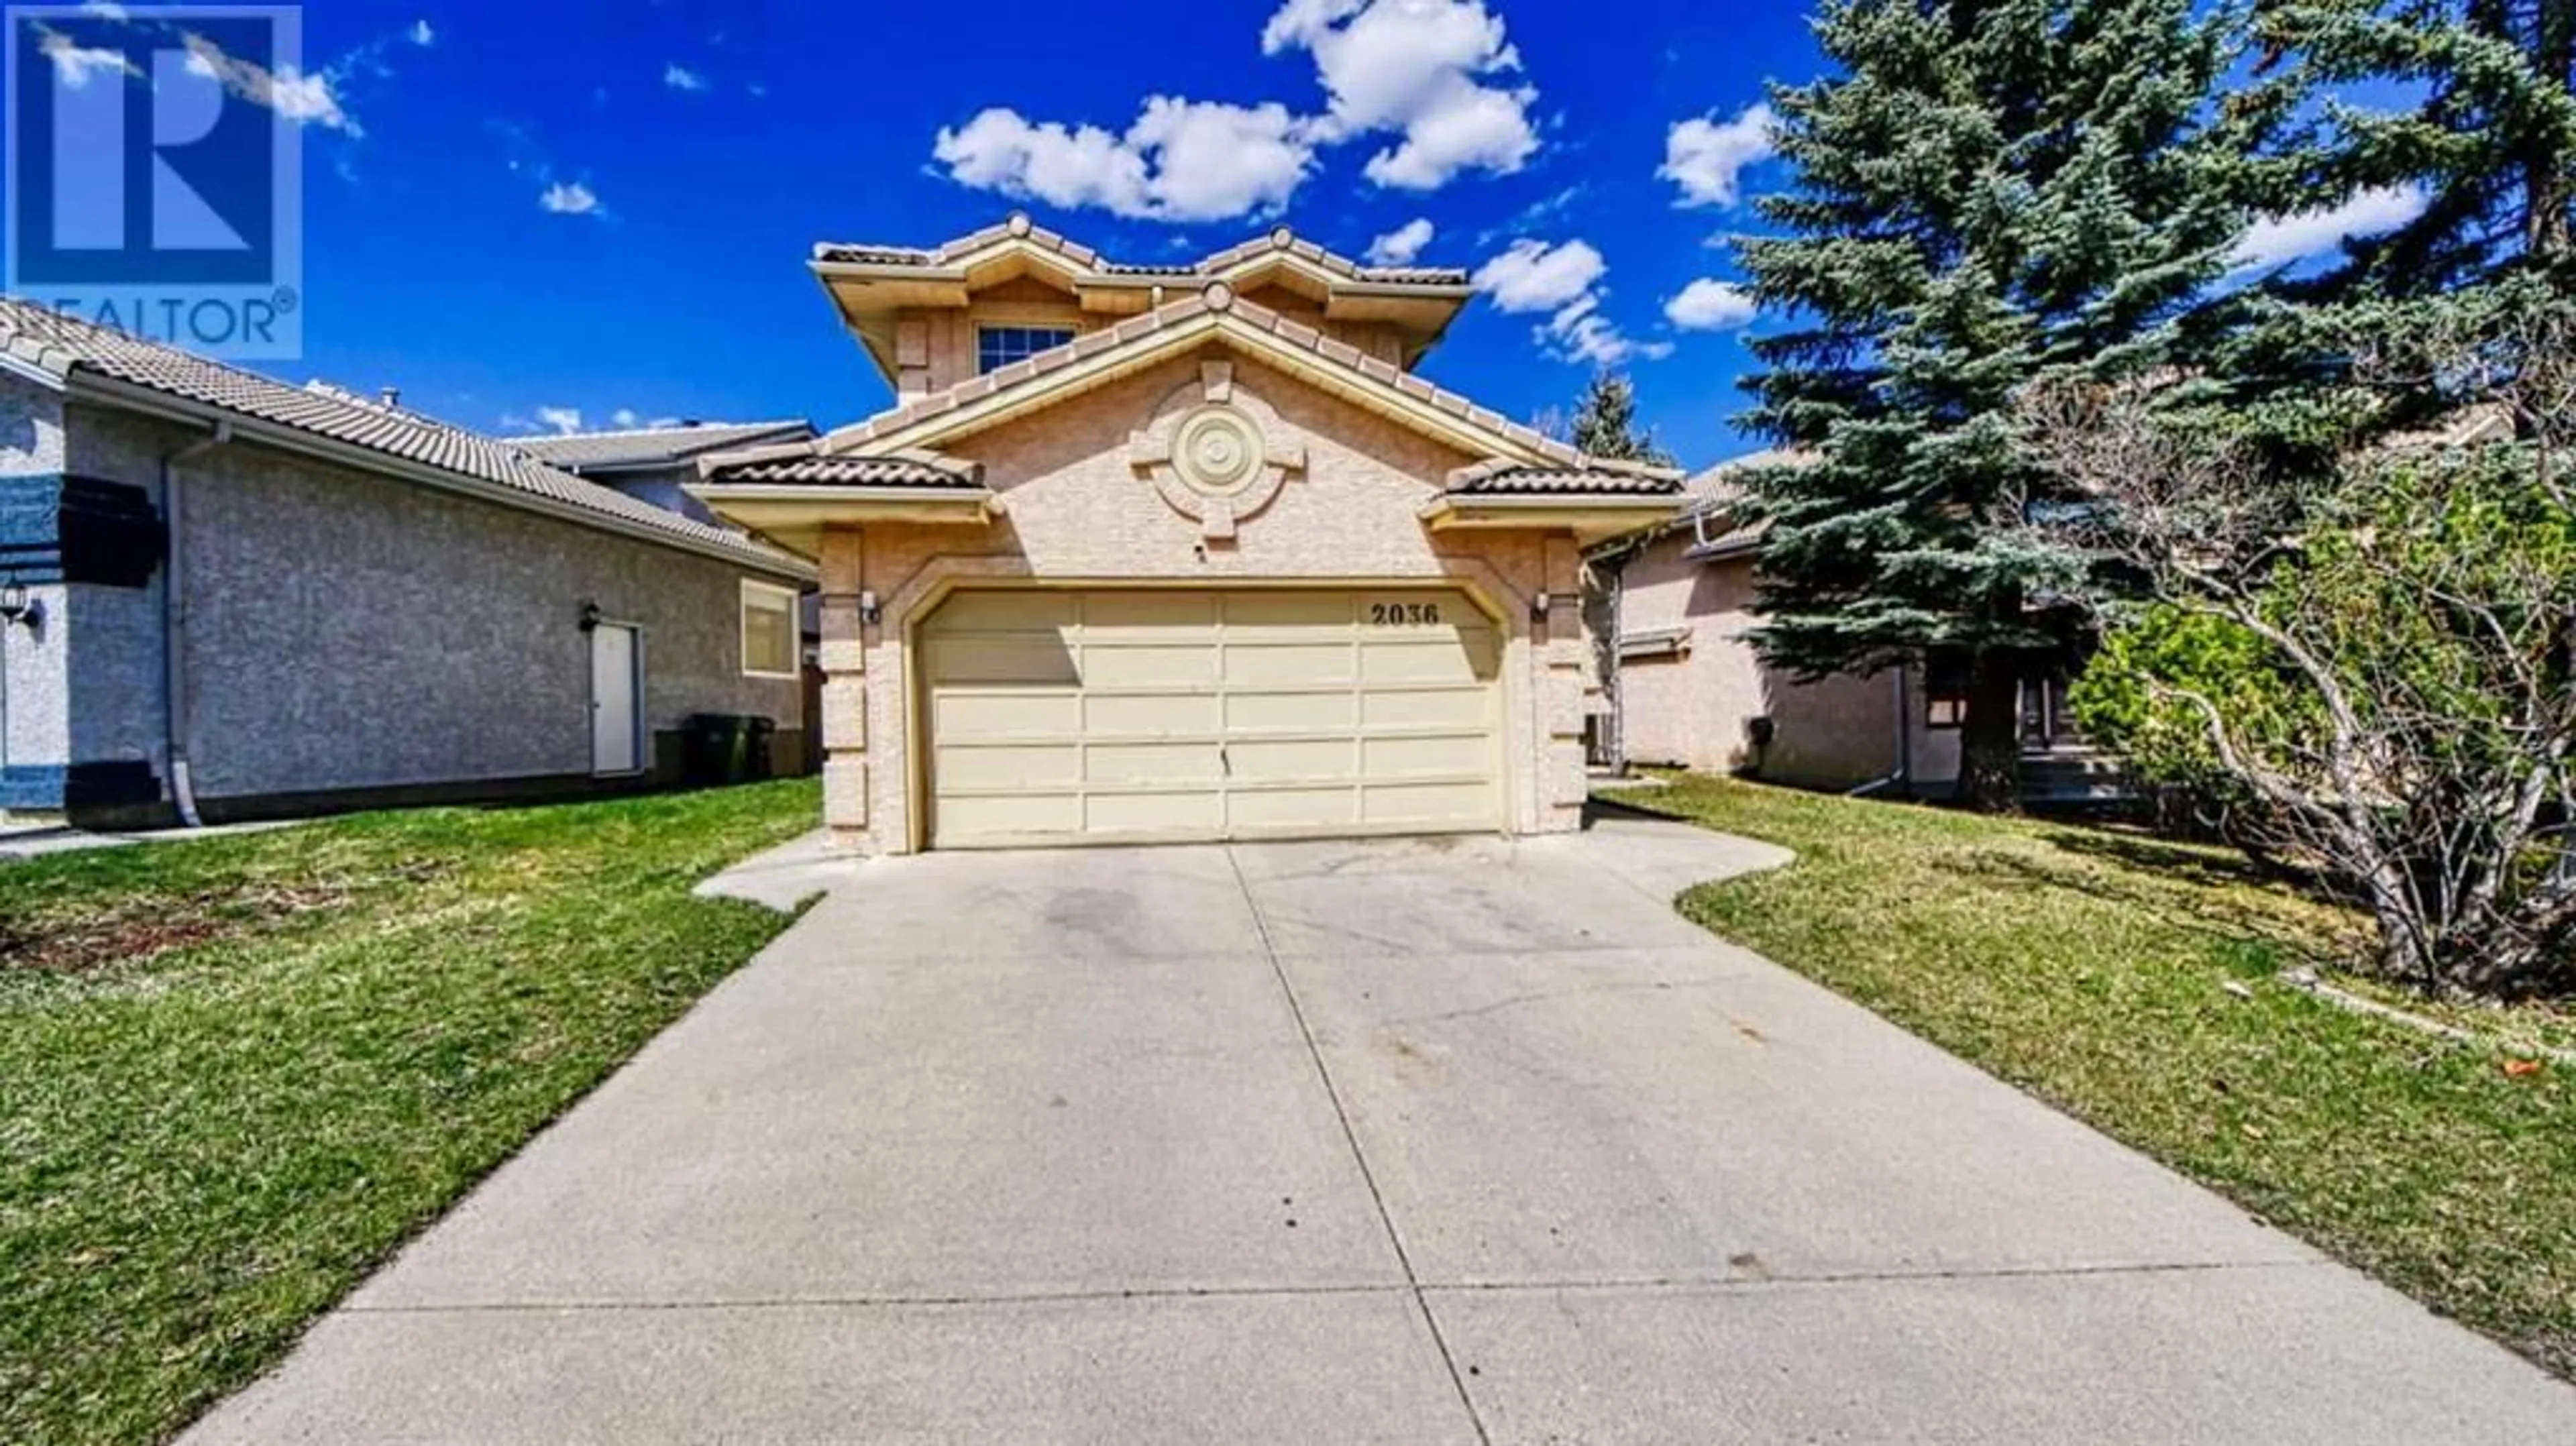 Frontside or backside of a home for 2036 Sirocco Drive SW, Calgary Alberta T3H2M9